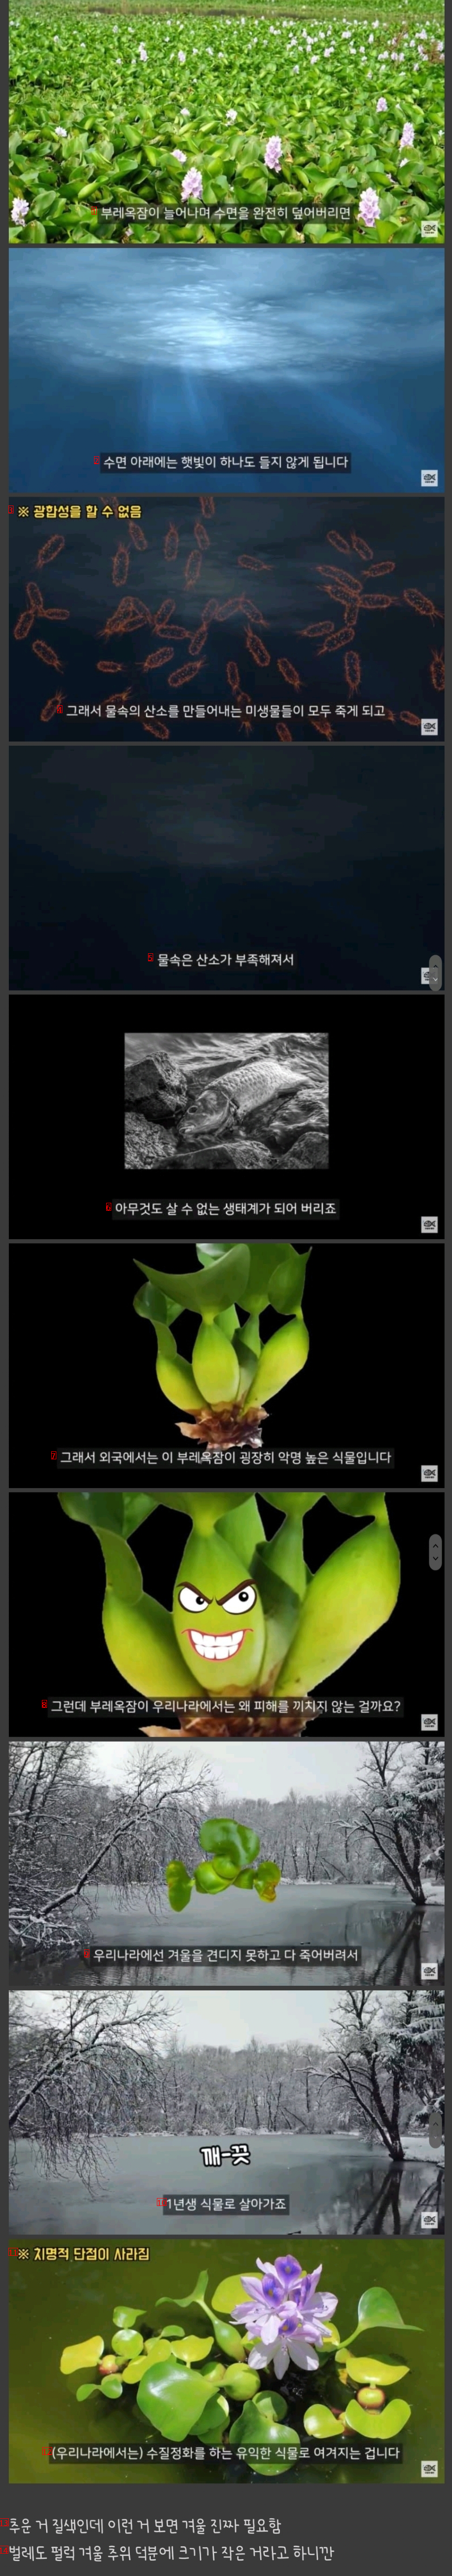 Weeds that are recognizable in Korea